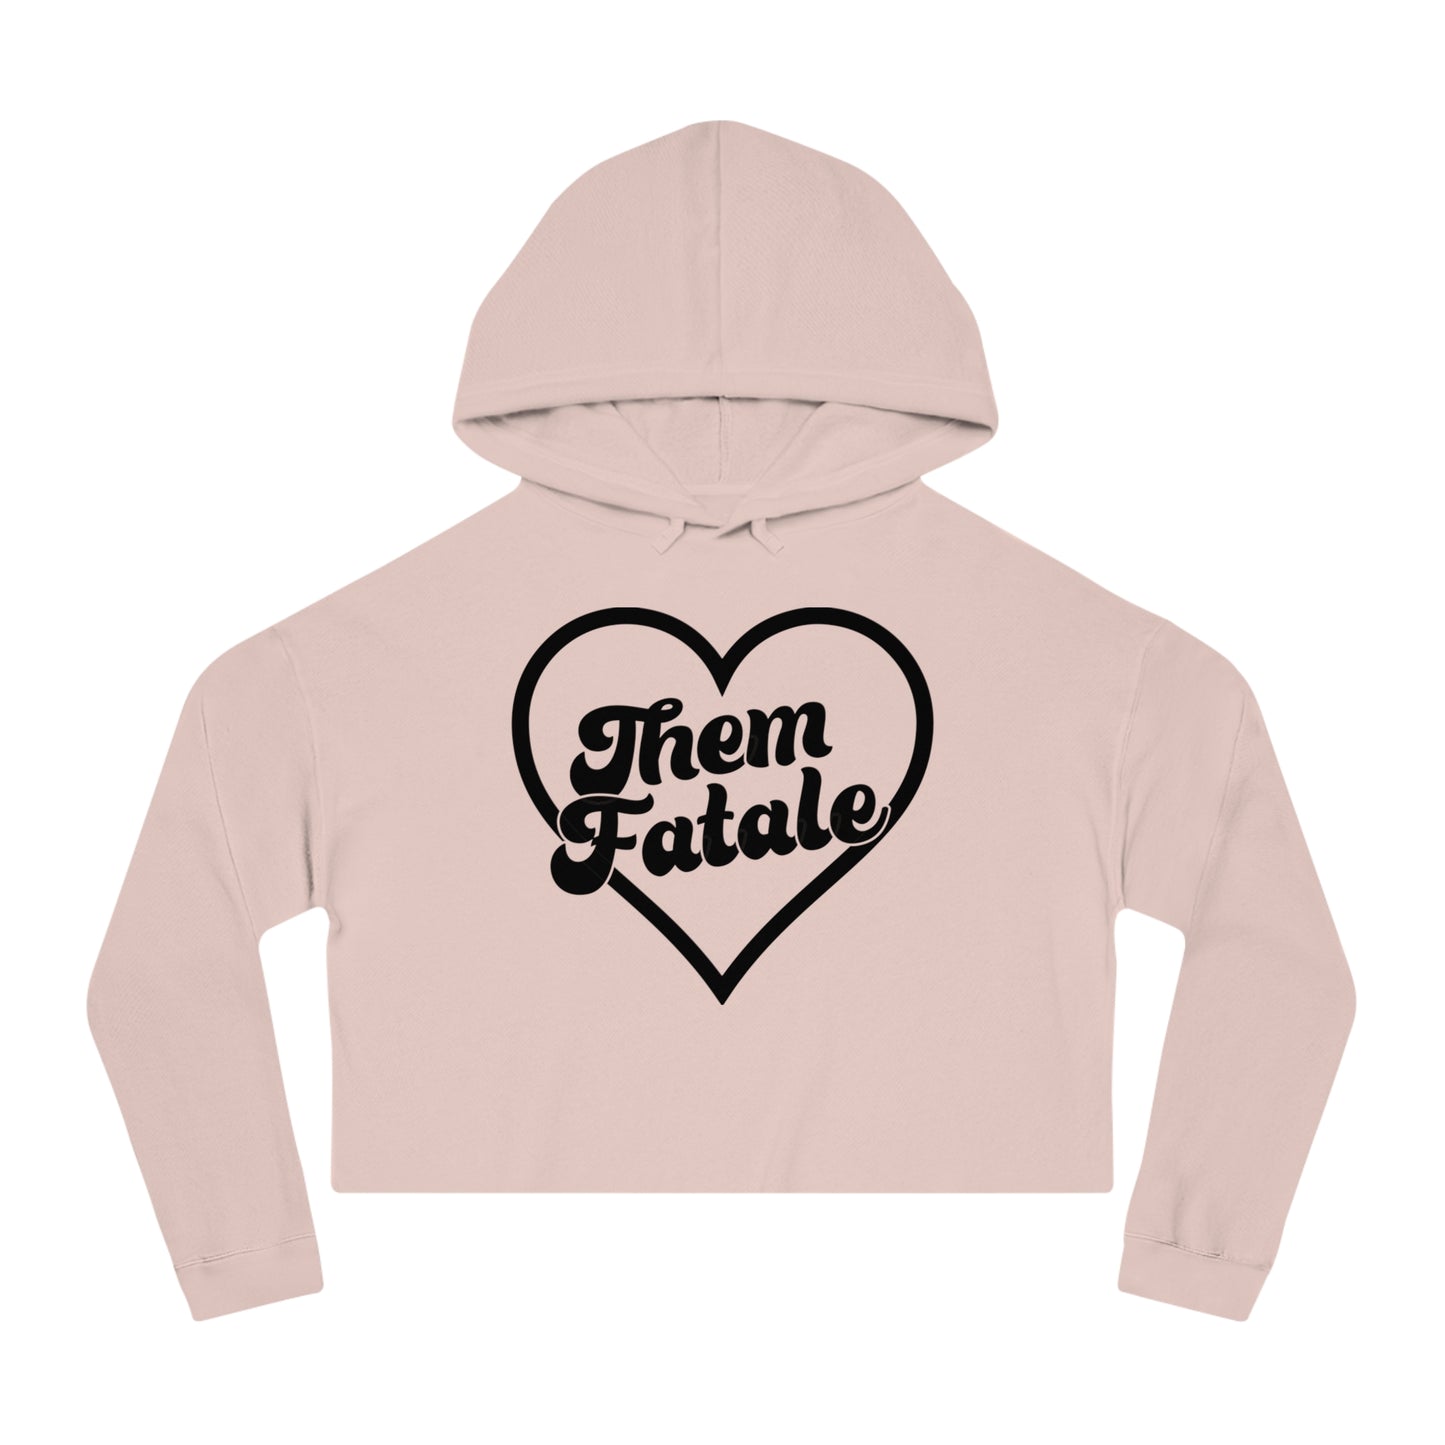 Them Fatale Cropped Hoodie